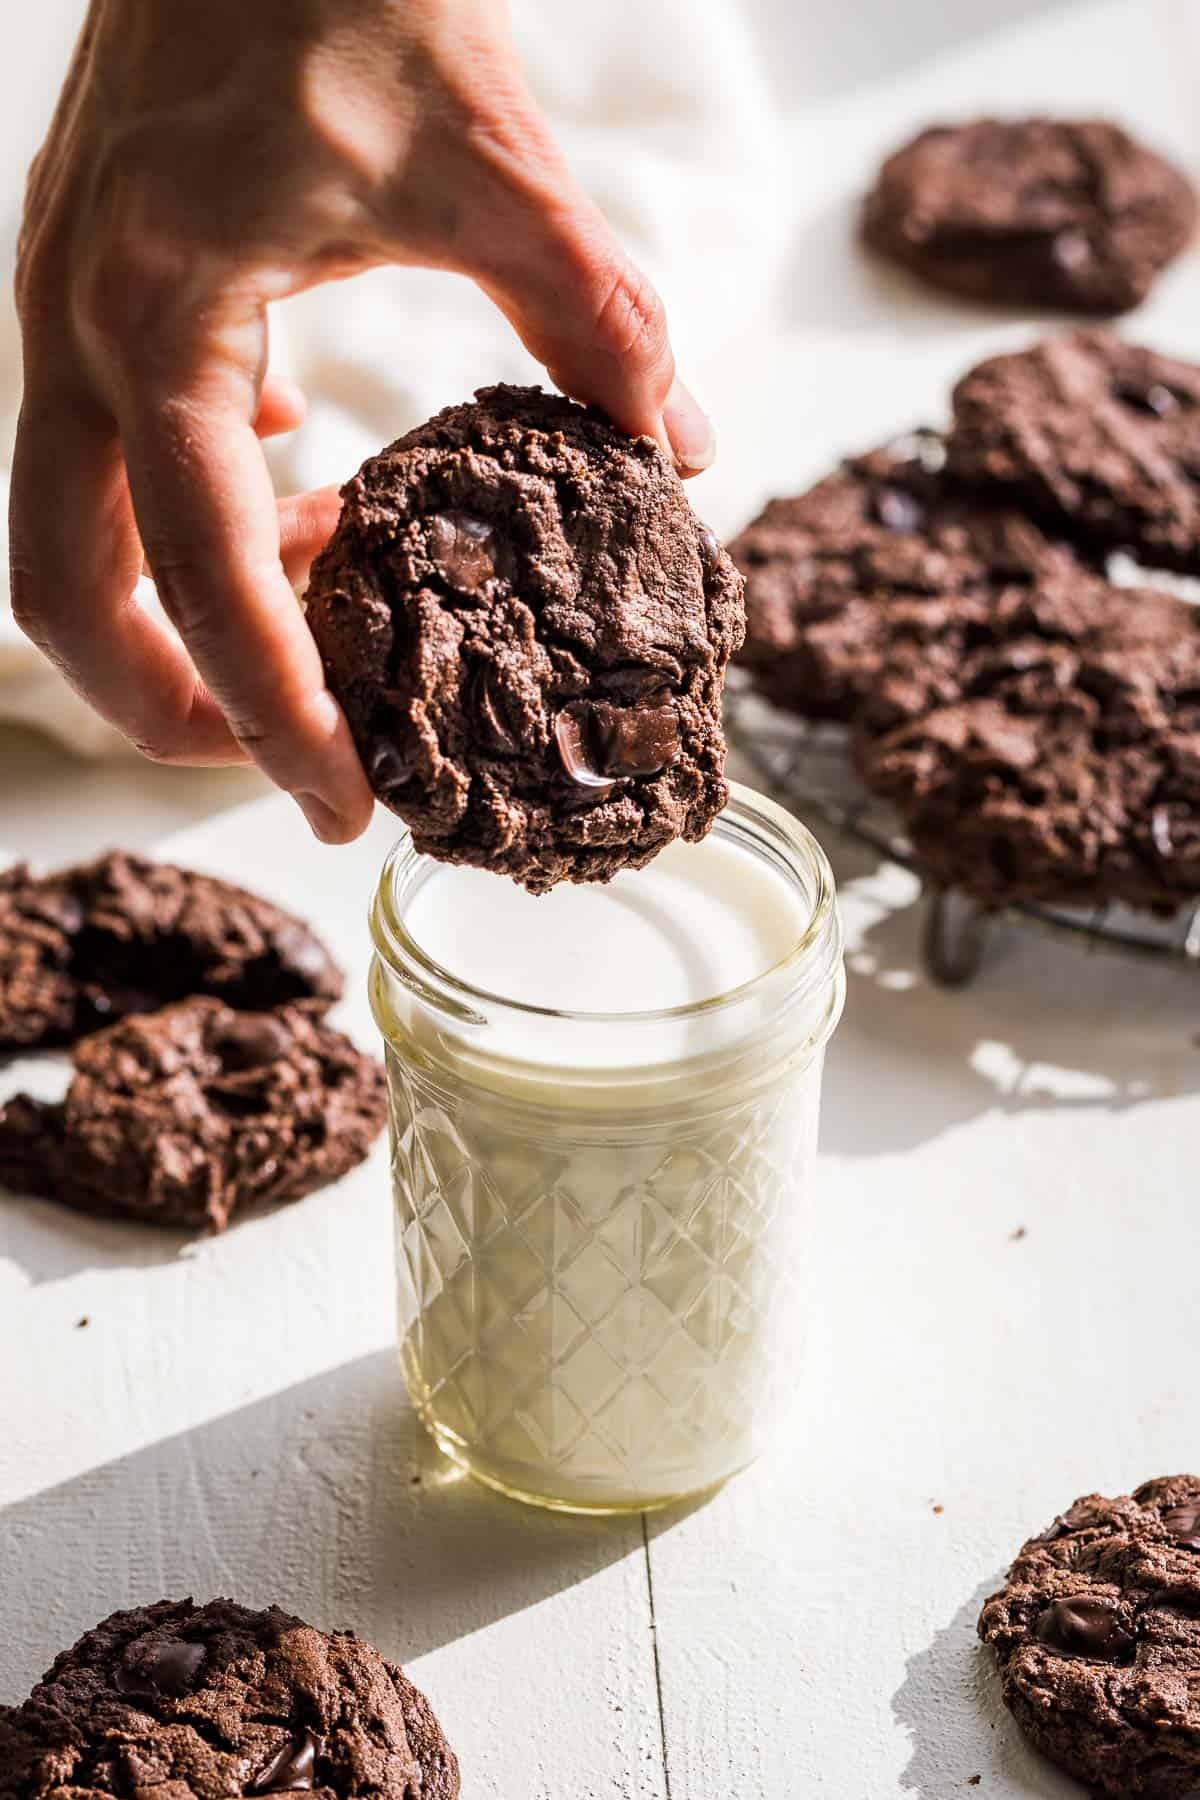 A hand dipping a chocolate almond butter cookie into a glass of milk with more cookies in the background.